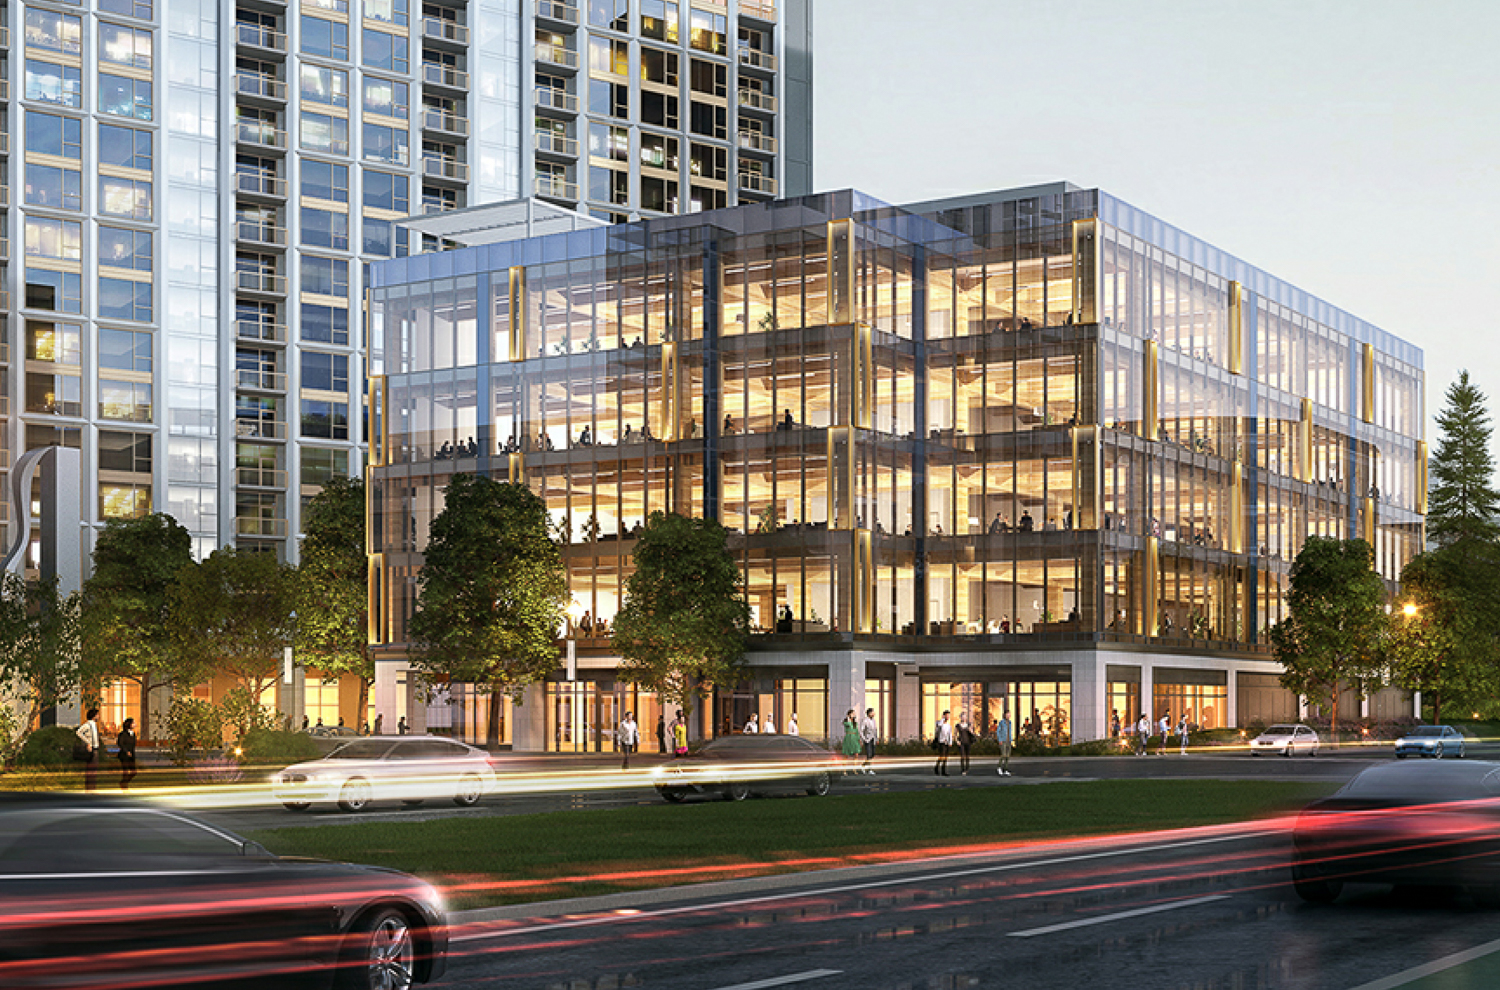 Lot X at 201 N Street office component, rendering by Solomon Cordwell Buenz